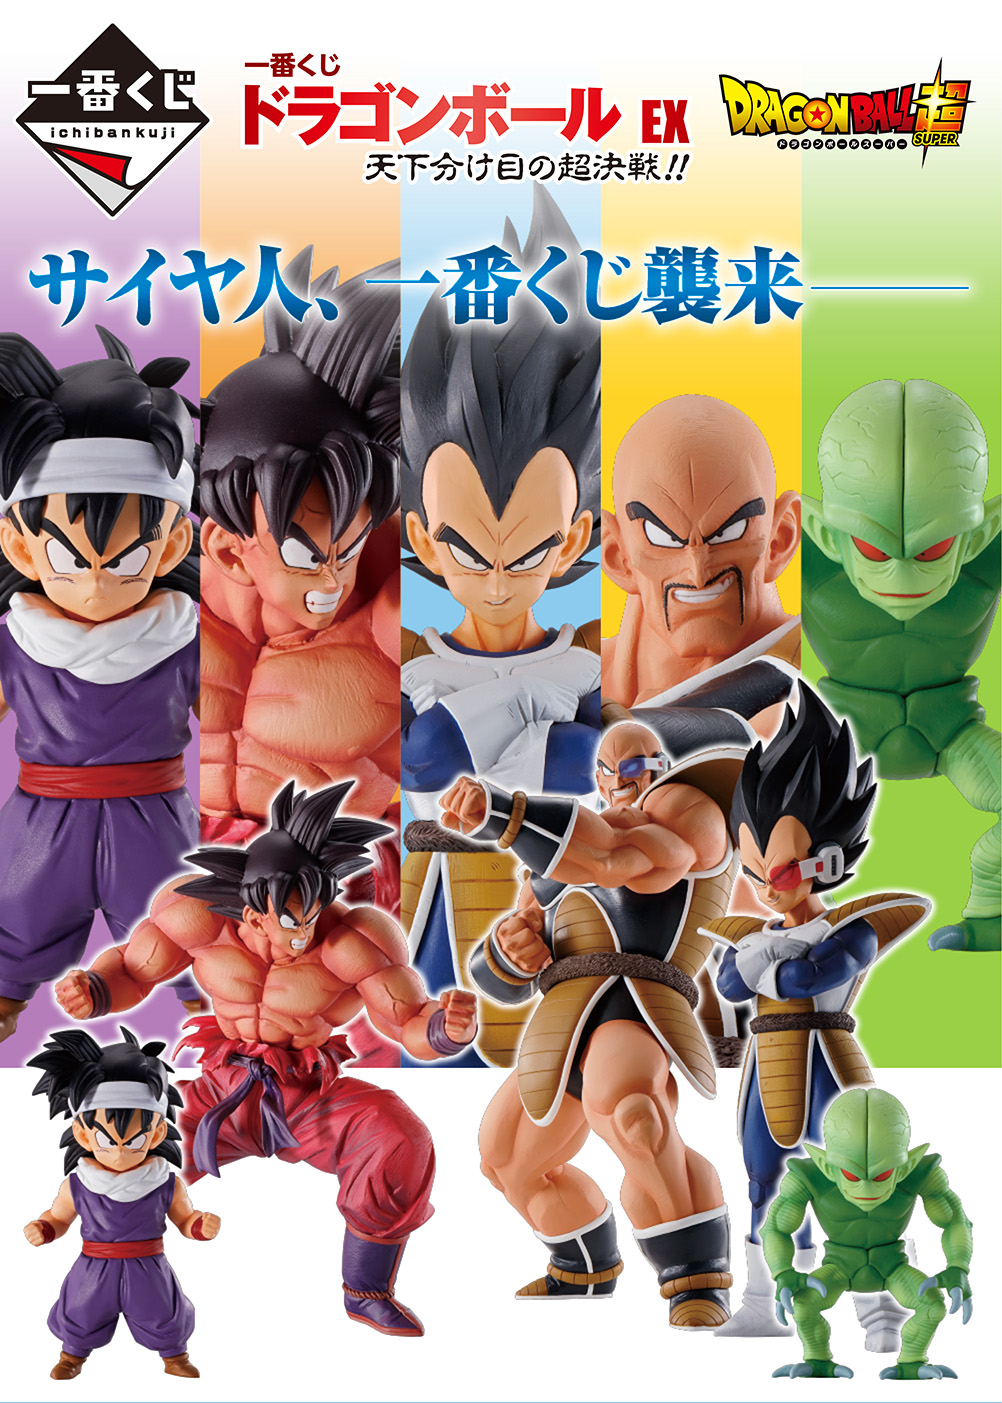 Ichiban Kuji Dragon Ball THE ANDROID BATTLE with D Prize ART Towel Android No 21 